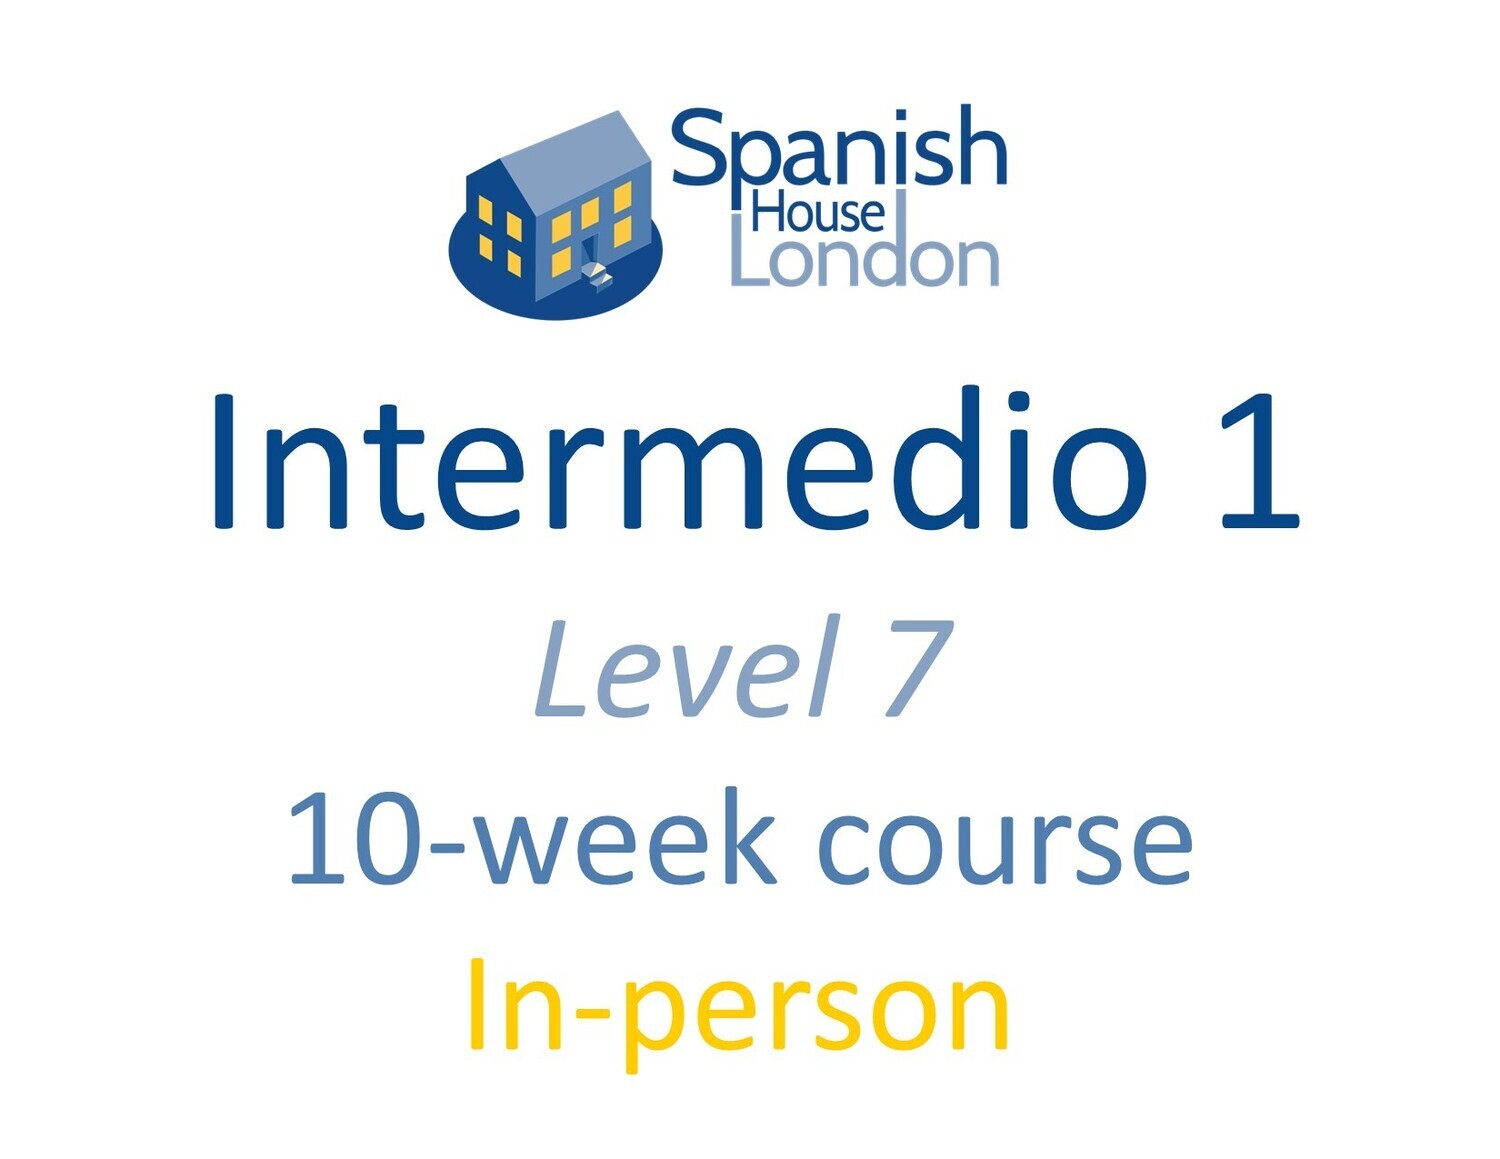 Intermedio 1 Course starting on 8th November at 6pm in Euston / King's Cross